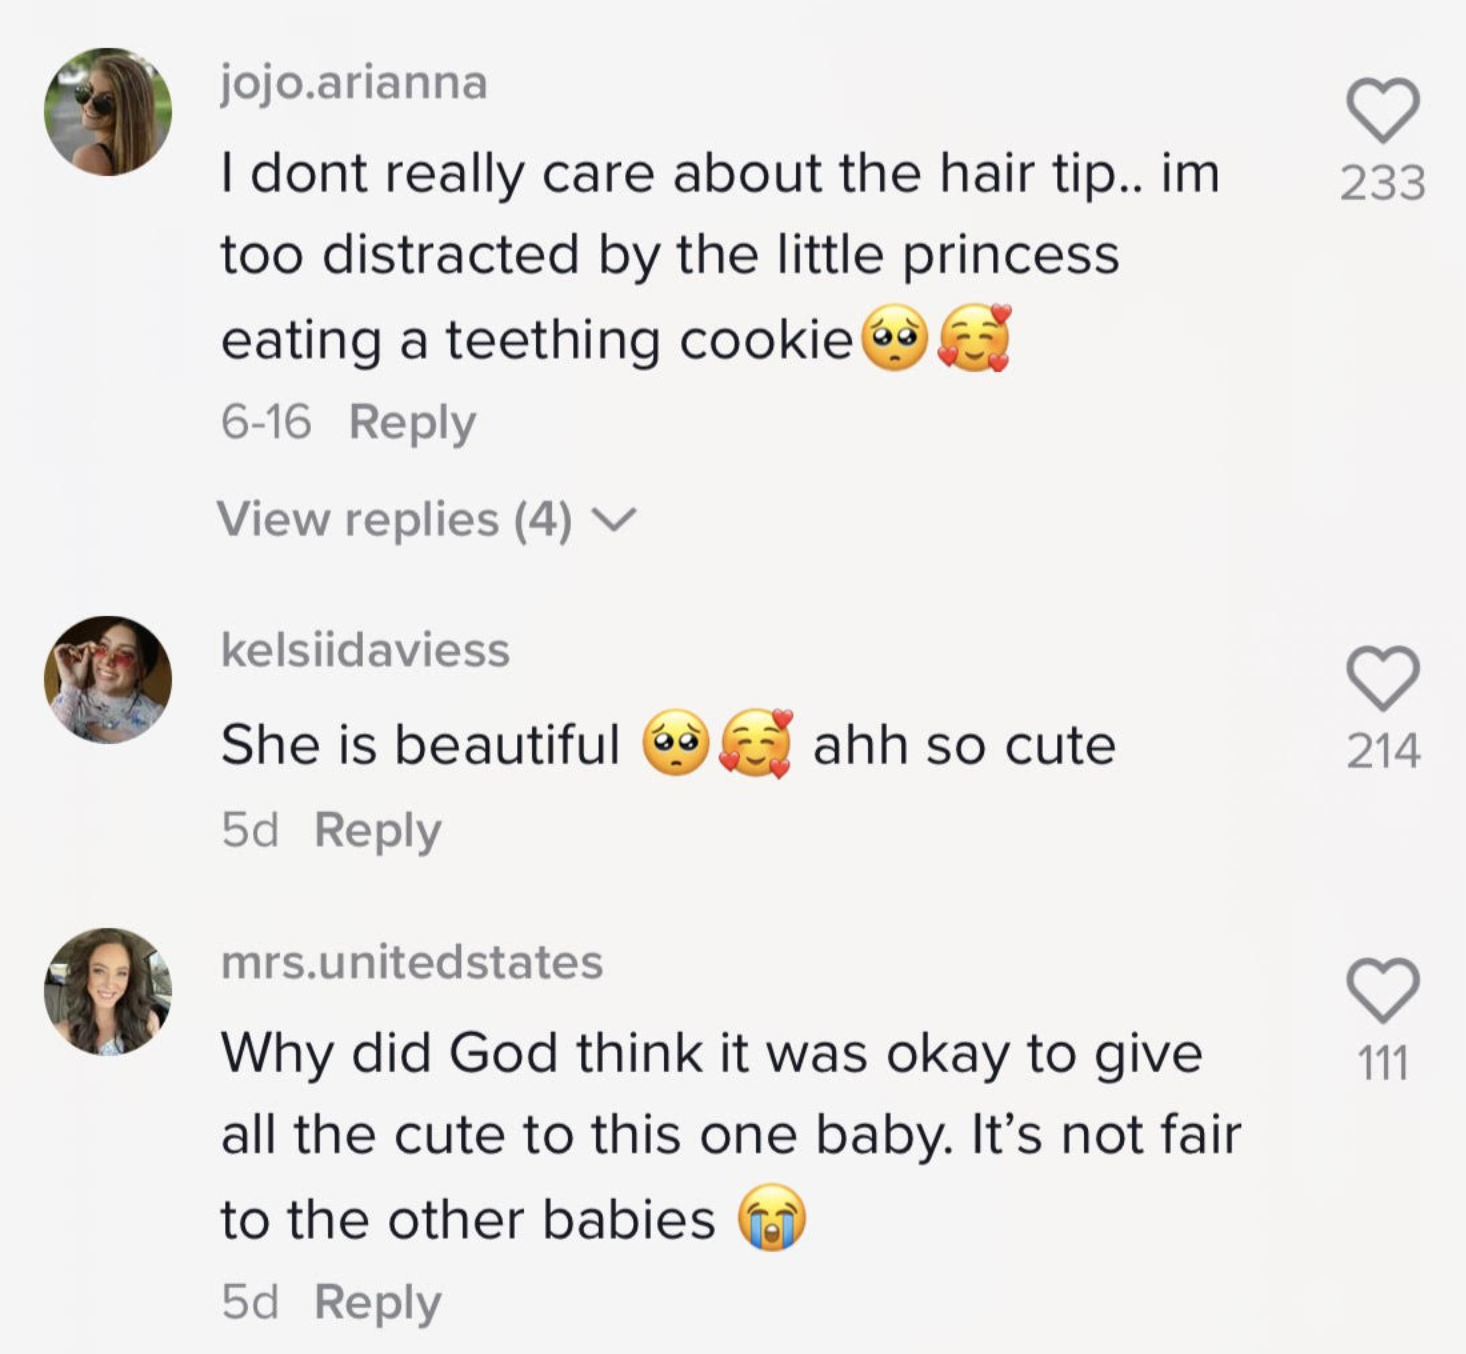 Several TikTokers commenting on how they&#x27;re distracted by how &quot;beautiful&quot; and &quot;cute&quot; &quot;the little princess eating a teething cookie&quot; is